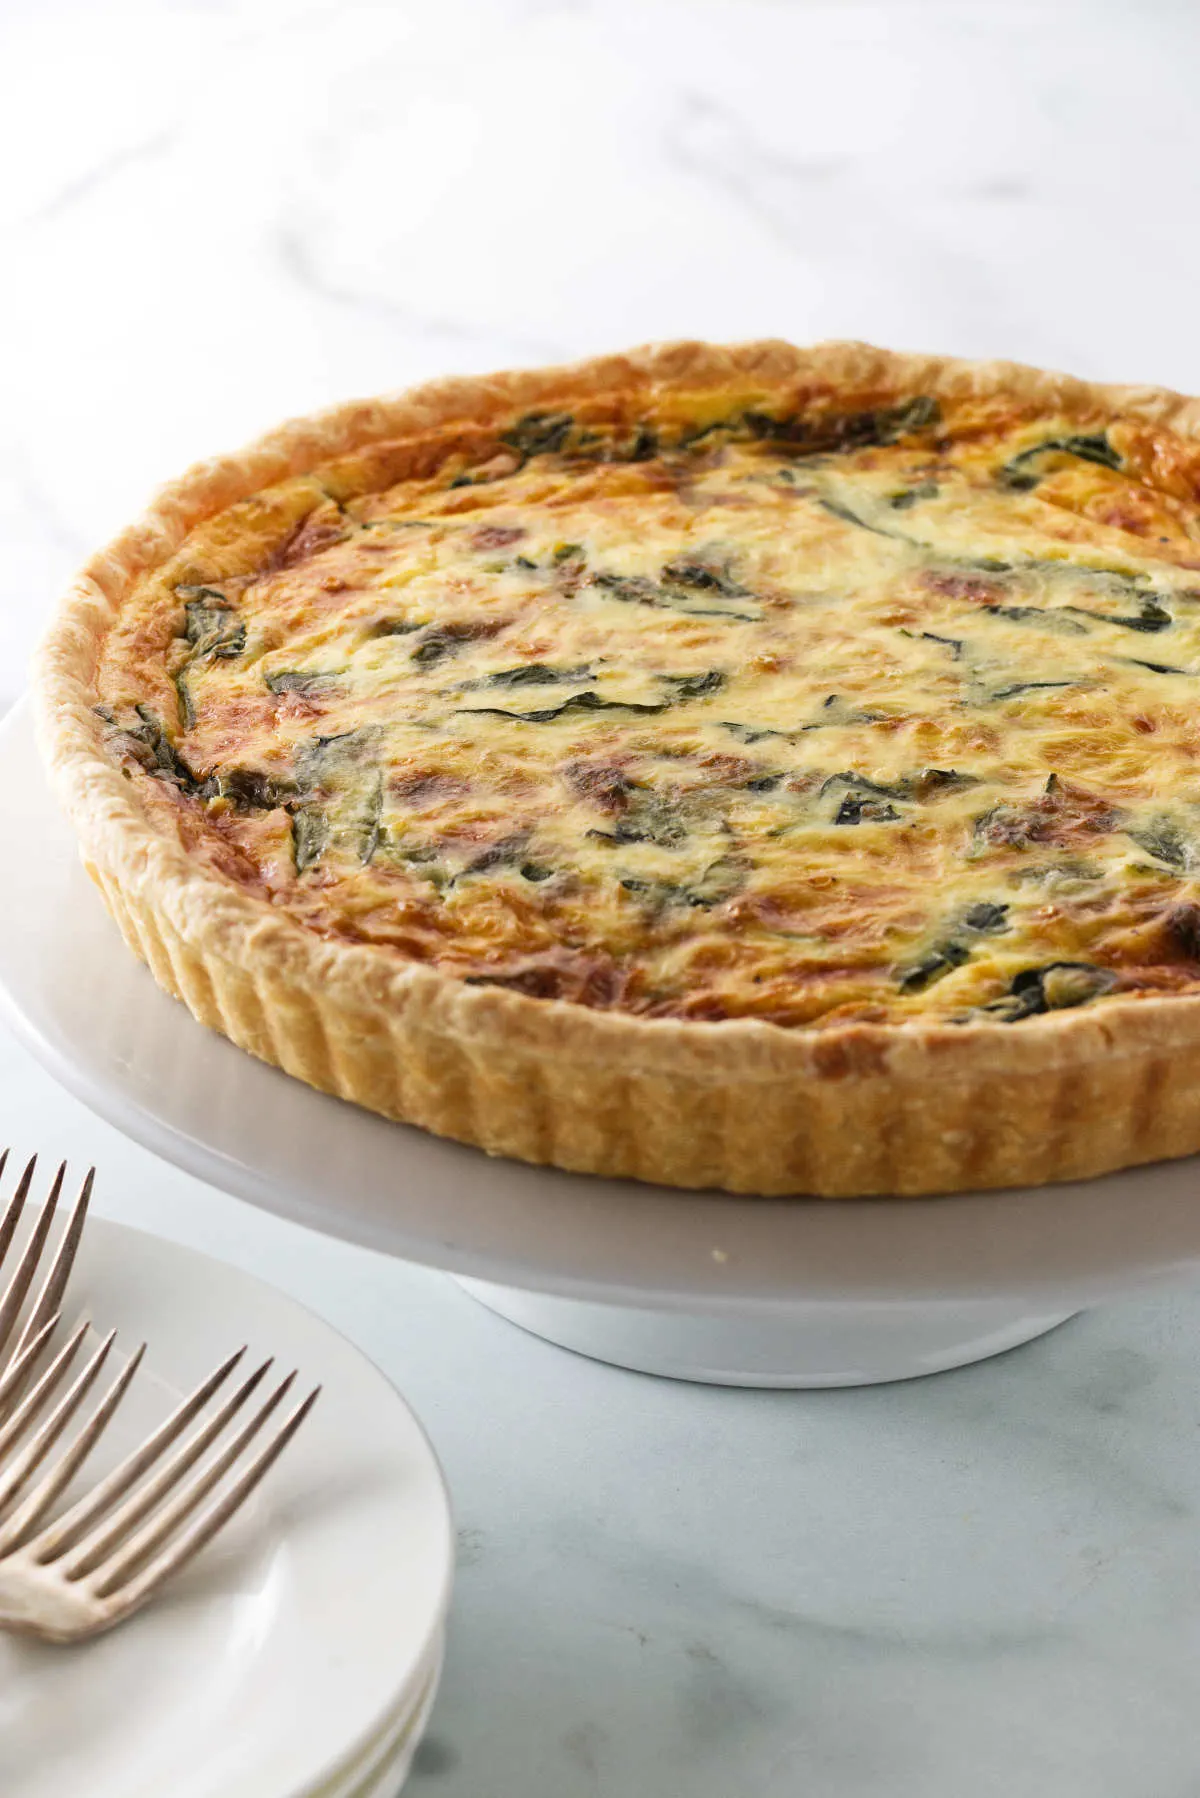 A quiche on a serving platter next to dinner plates.